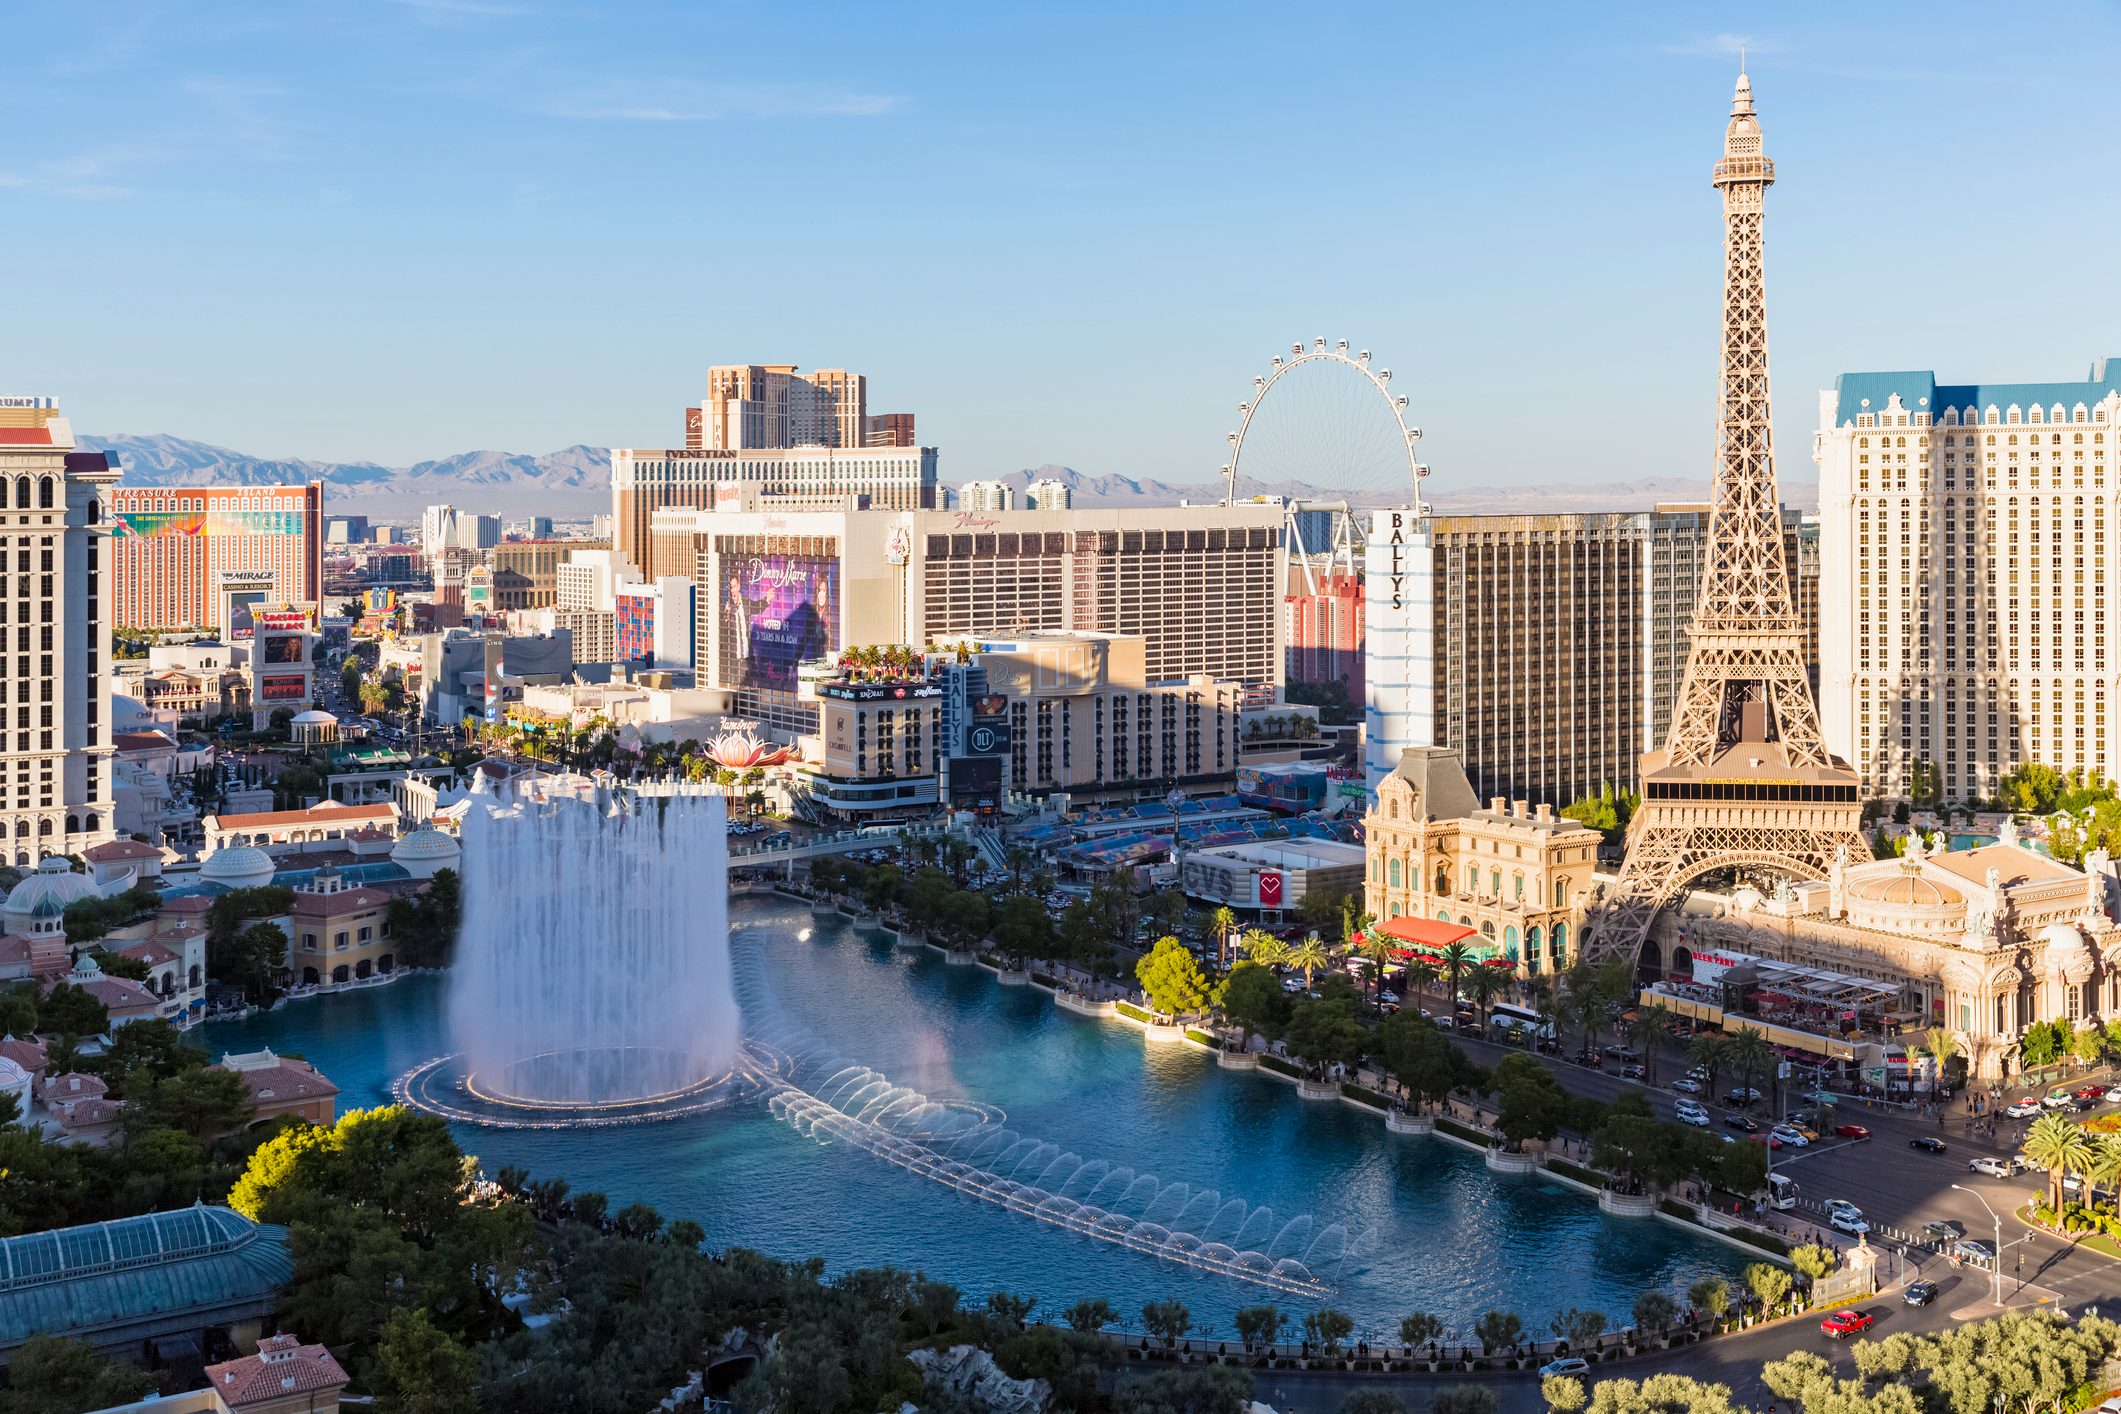 <h3 class="">North America</h3> <p>Flights to Las Vegas are affordable year-round from most regions, especially if you know the <a href="https://www.rd.com/article/holiday-travel-tips/" rel="noopener noreferrer">best travel tips</a>. CheapAir.com recently listed Sin City as one of its top spots for culture, cuisine and adventure that you can visit without breaking the bank.</p> <p>Dining and accommodation can be had for a song, even if you're not a high roller, with five-star hotels offering rates just over $100. Depending on the time of year, airfare here tends to start at $160 round trip on <a href="https://www.rd.com/article/budget-airlines/" rel="noopener noreferrer">budget airlines</a>, such as Spirit, and you won't even need a rental car during your stay, since there's a free shuttle to take you up and down the Vegas strip.</p>